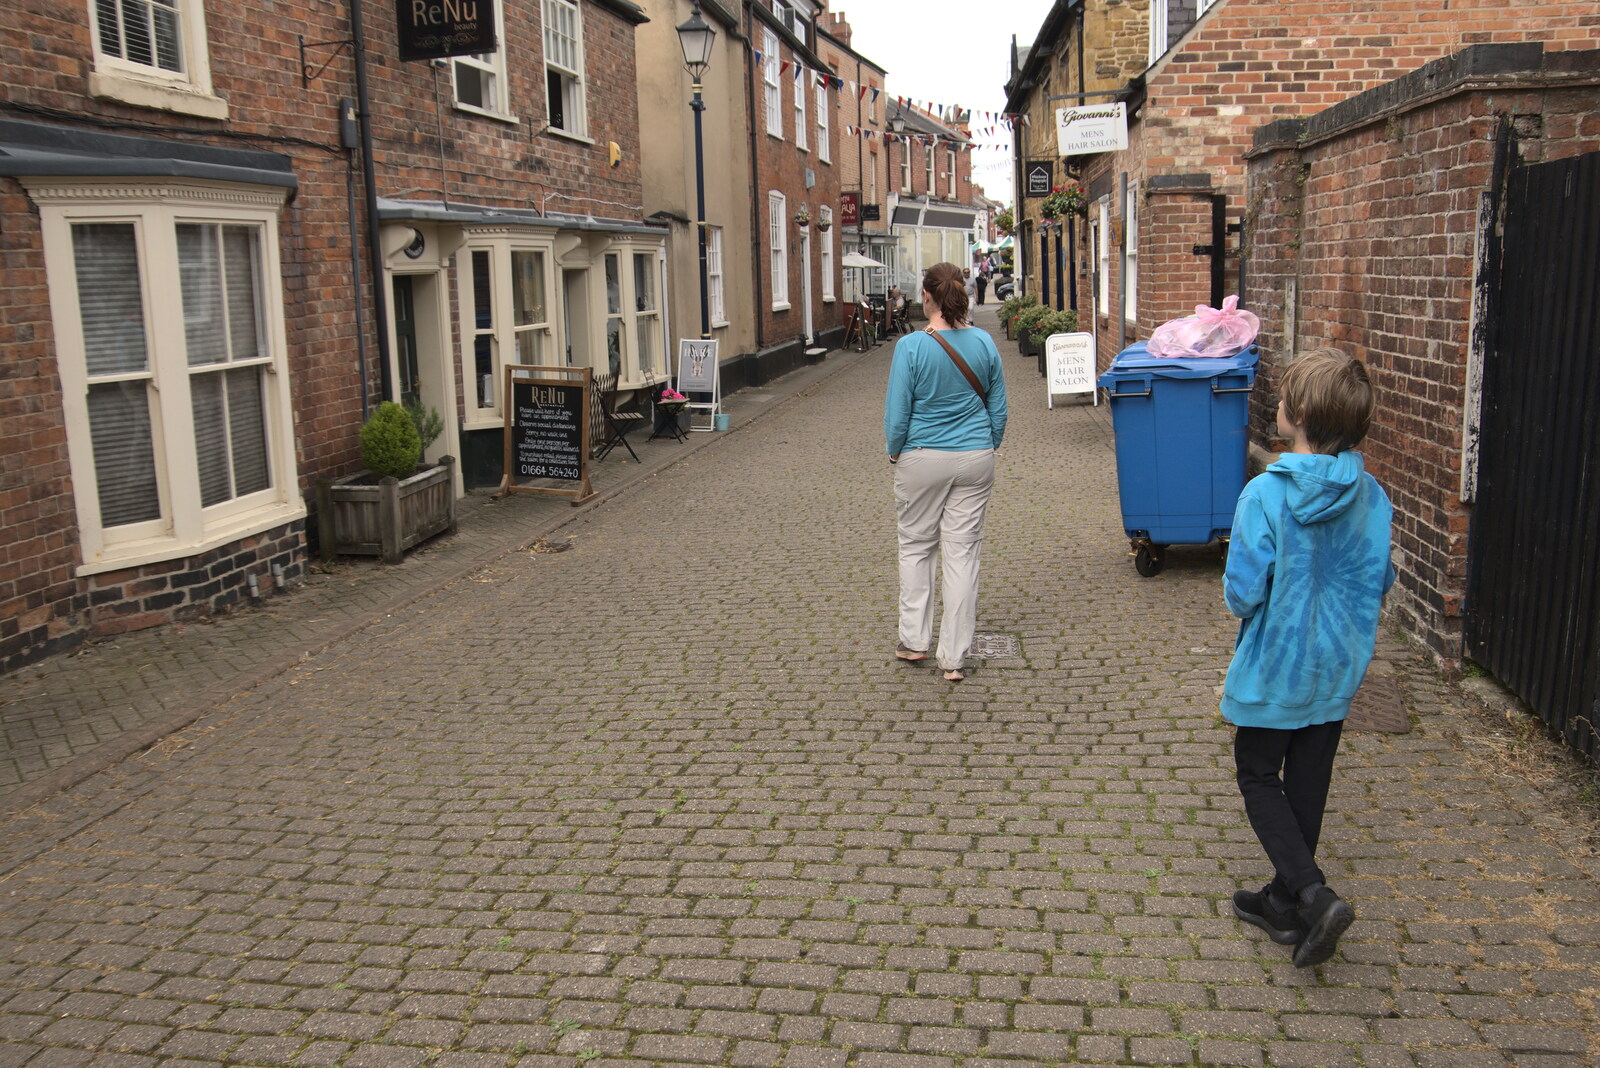 The cobbles of Church Street from Pork Pies and Dockside Dereliction, Melton Mowbray and Liverpool - 7th August 2021